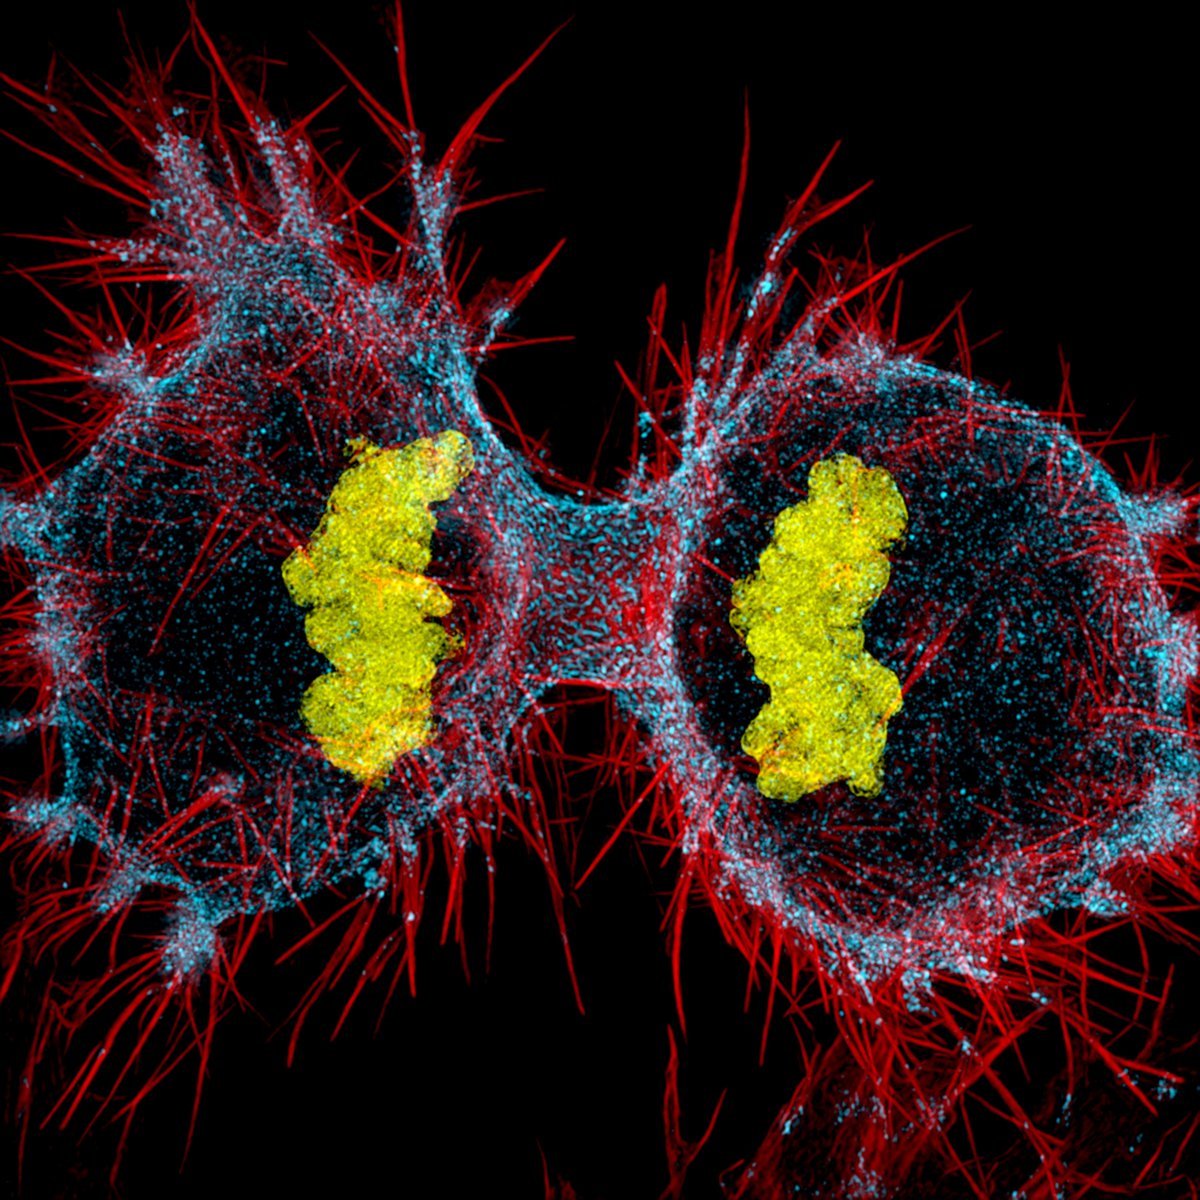 human-hela-cell-undergoing-cell-division